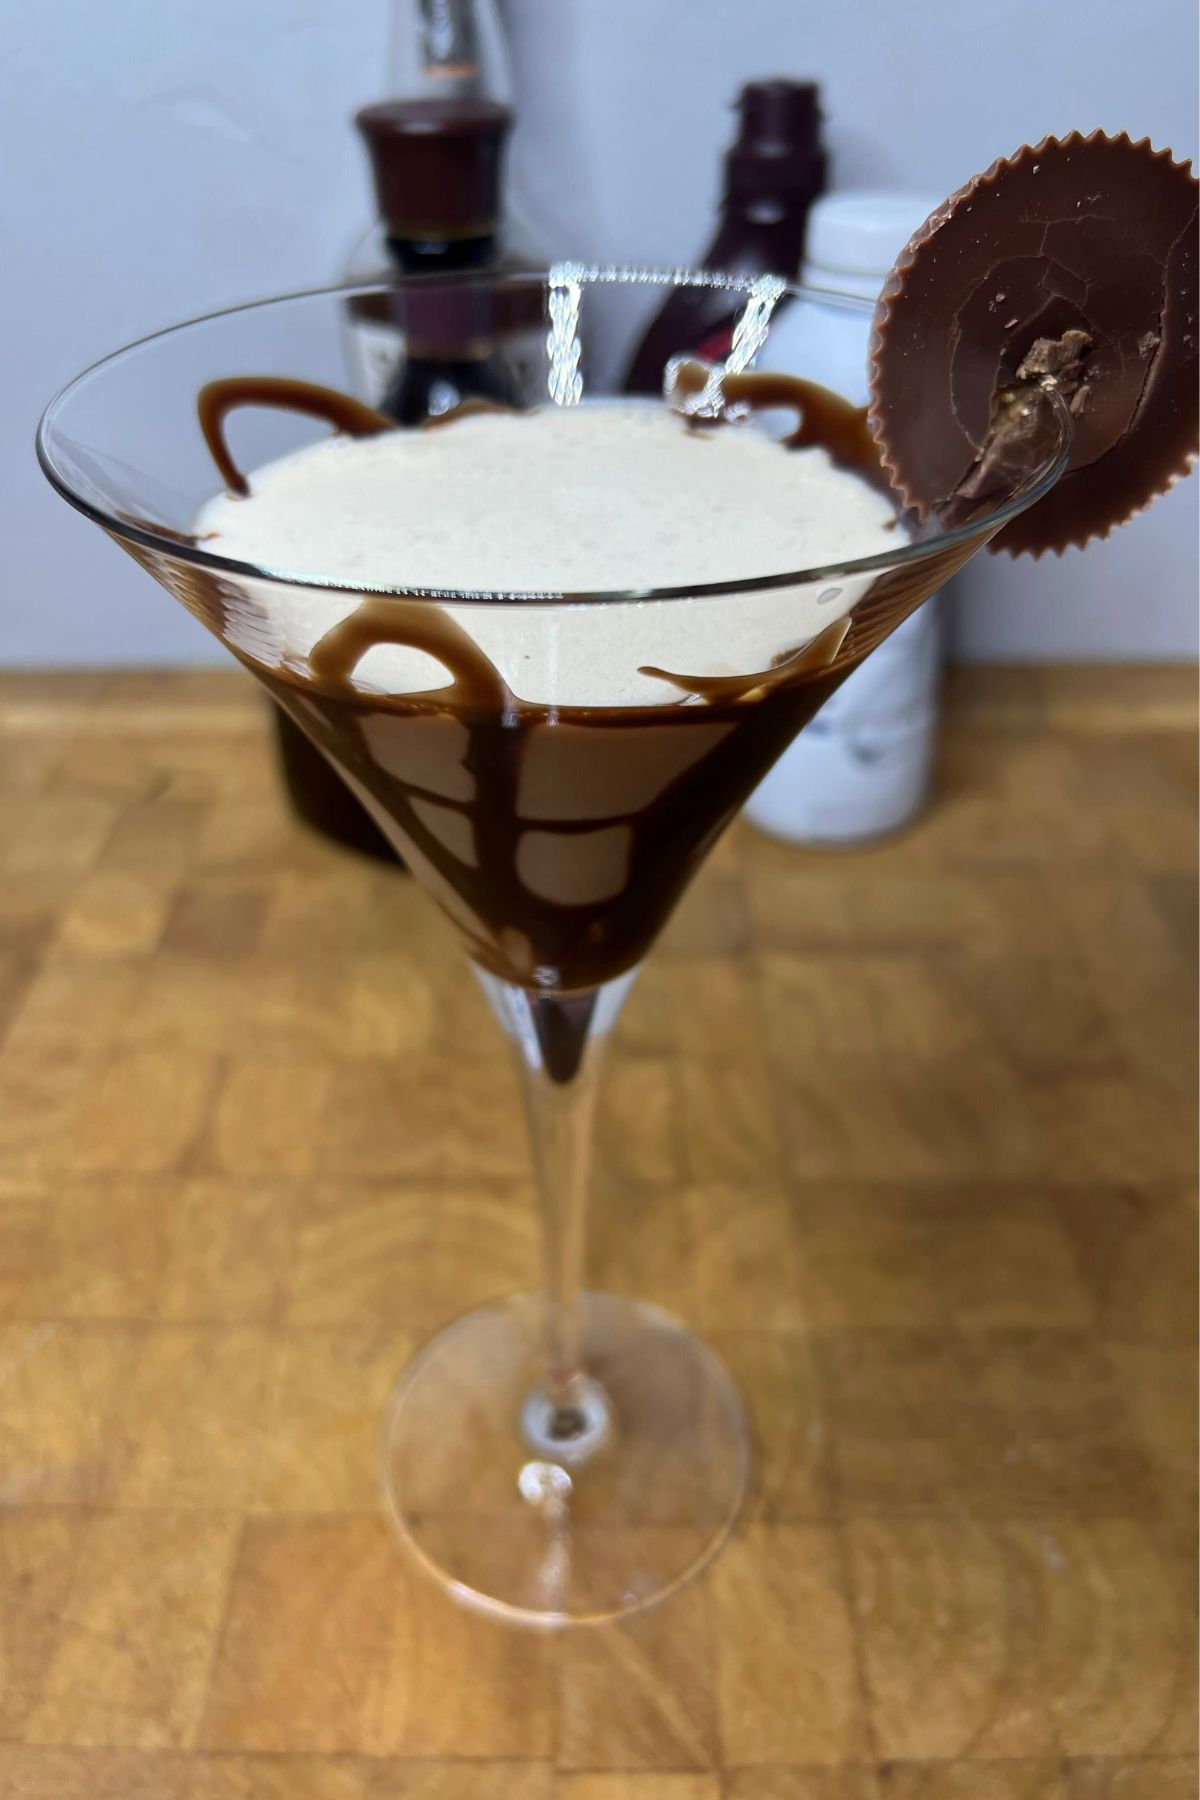 Peanut butter cup martini on a wooden table.